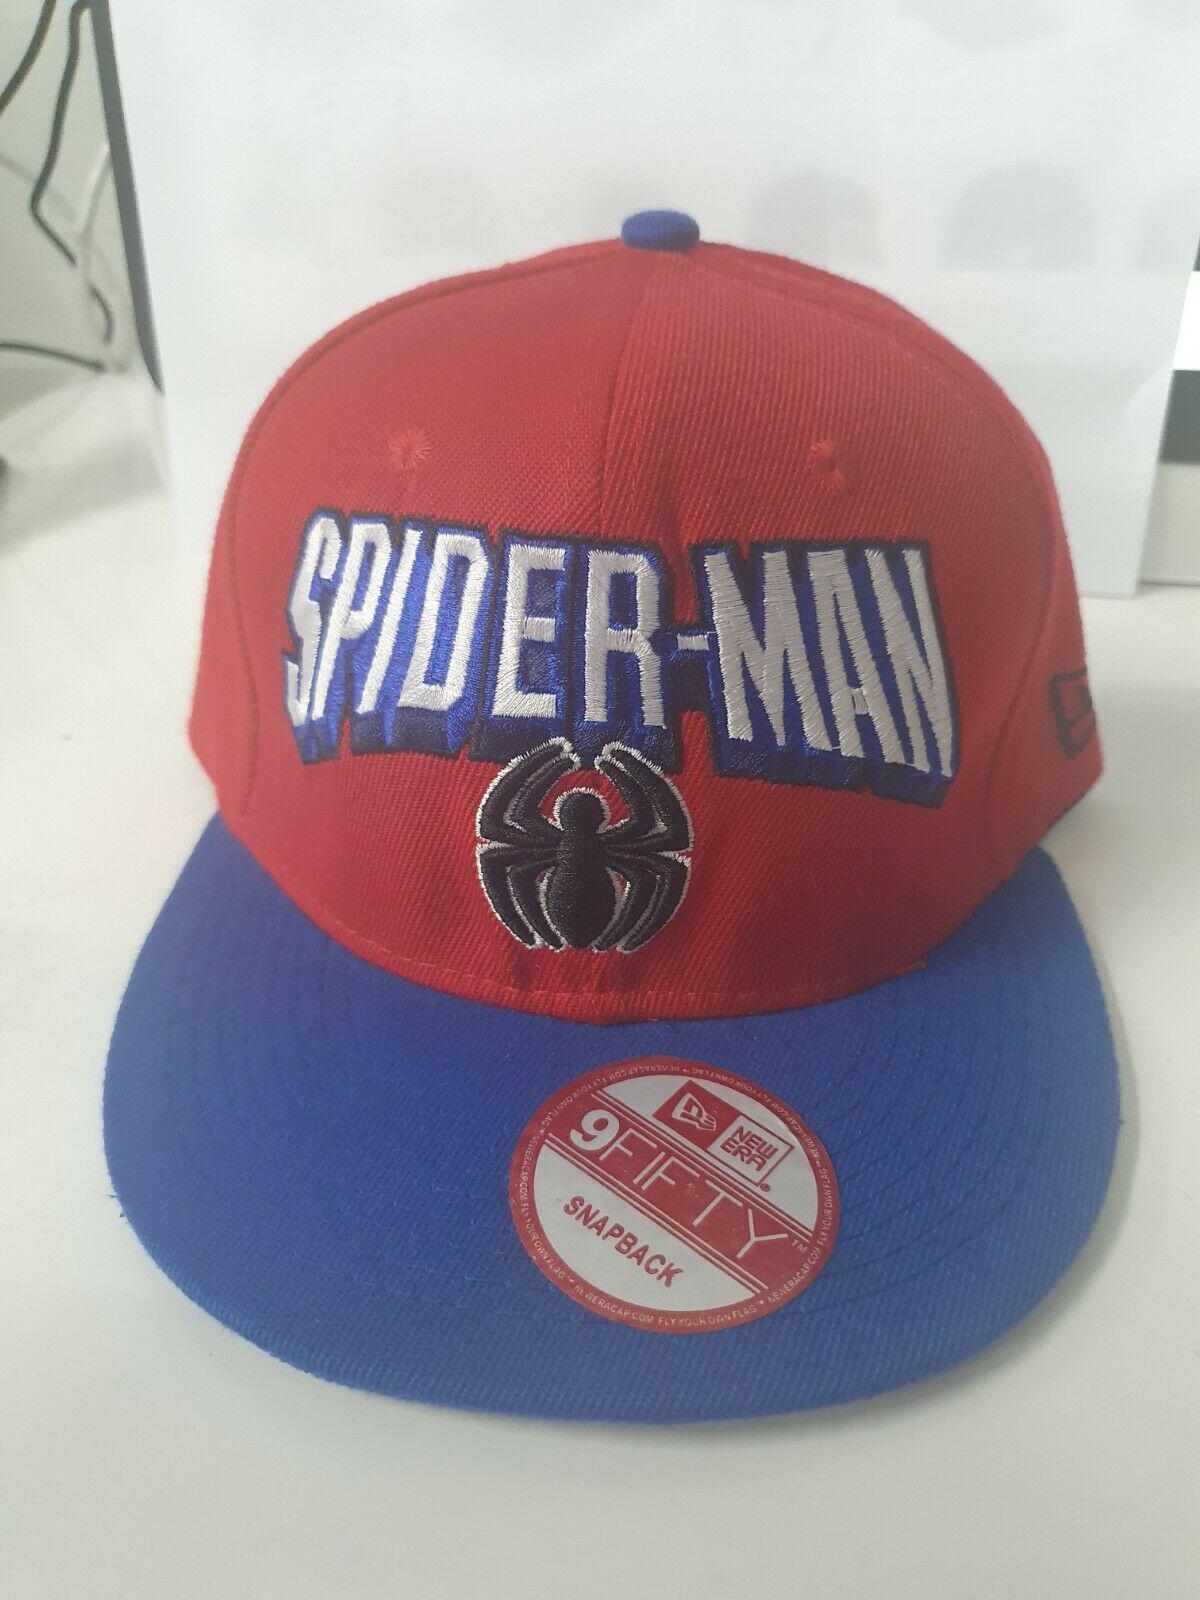 Spiderman - Snapback Cap Hat - Suit Youth Adult - Free Express Post